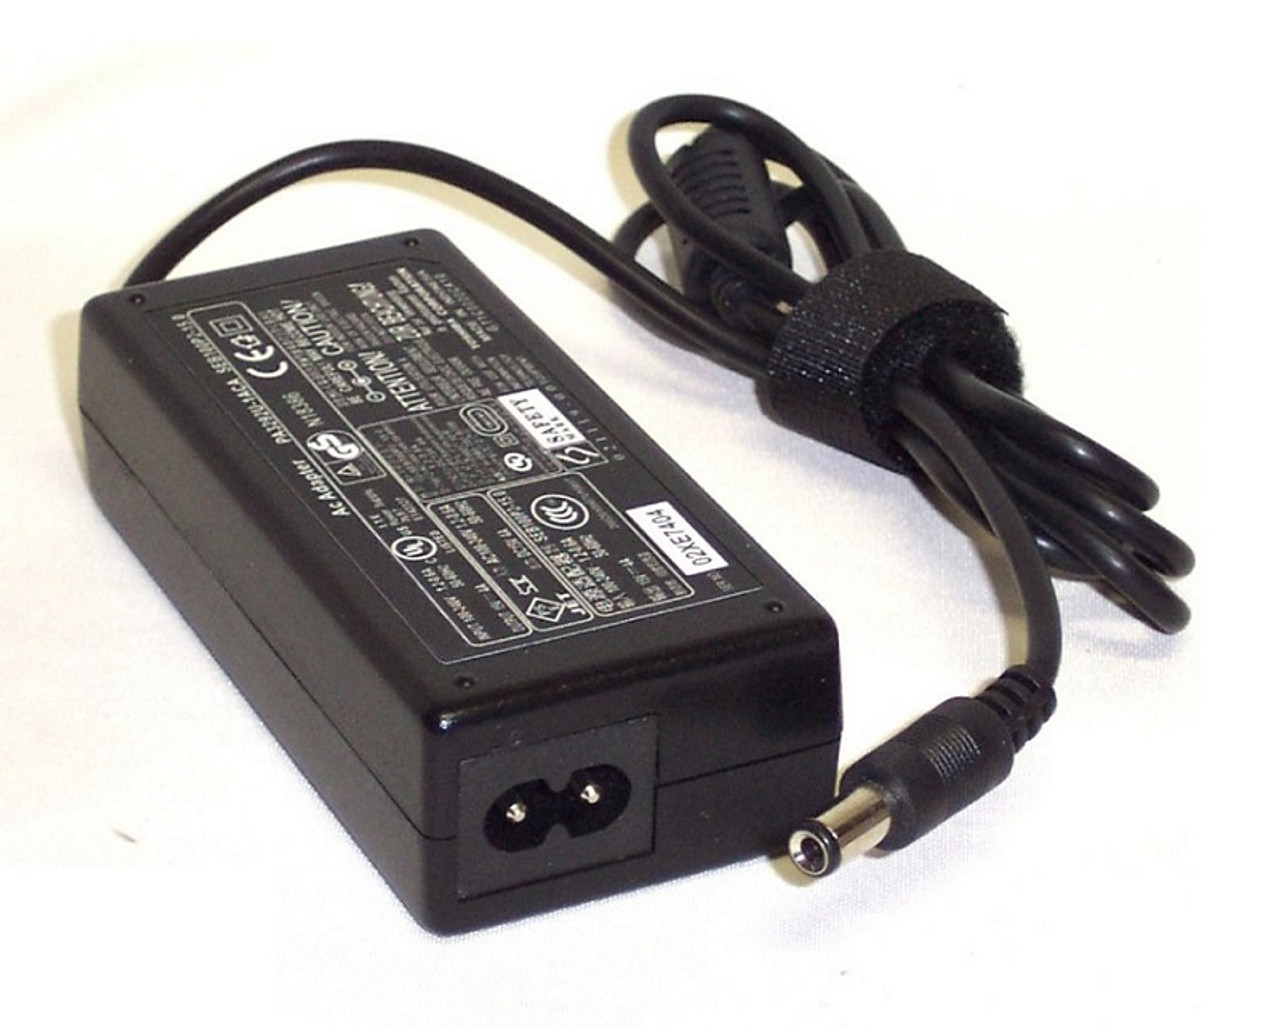 F2800 - Dell Auto Air Adapter includes AC Powercord 12v DC cable Adapter